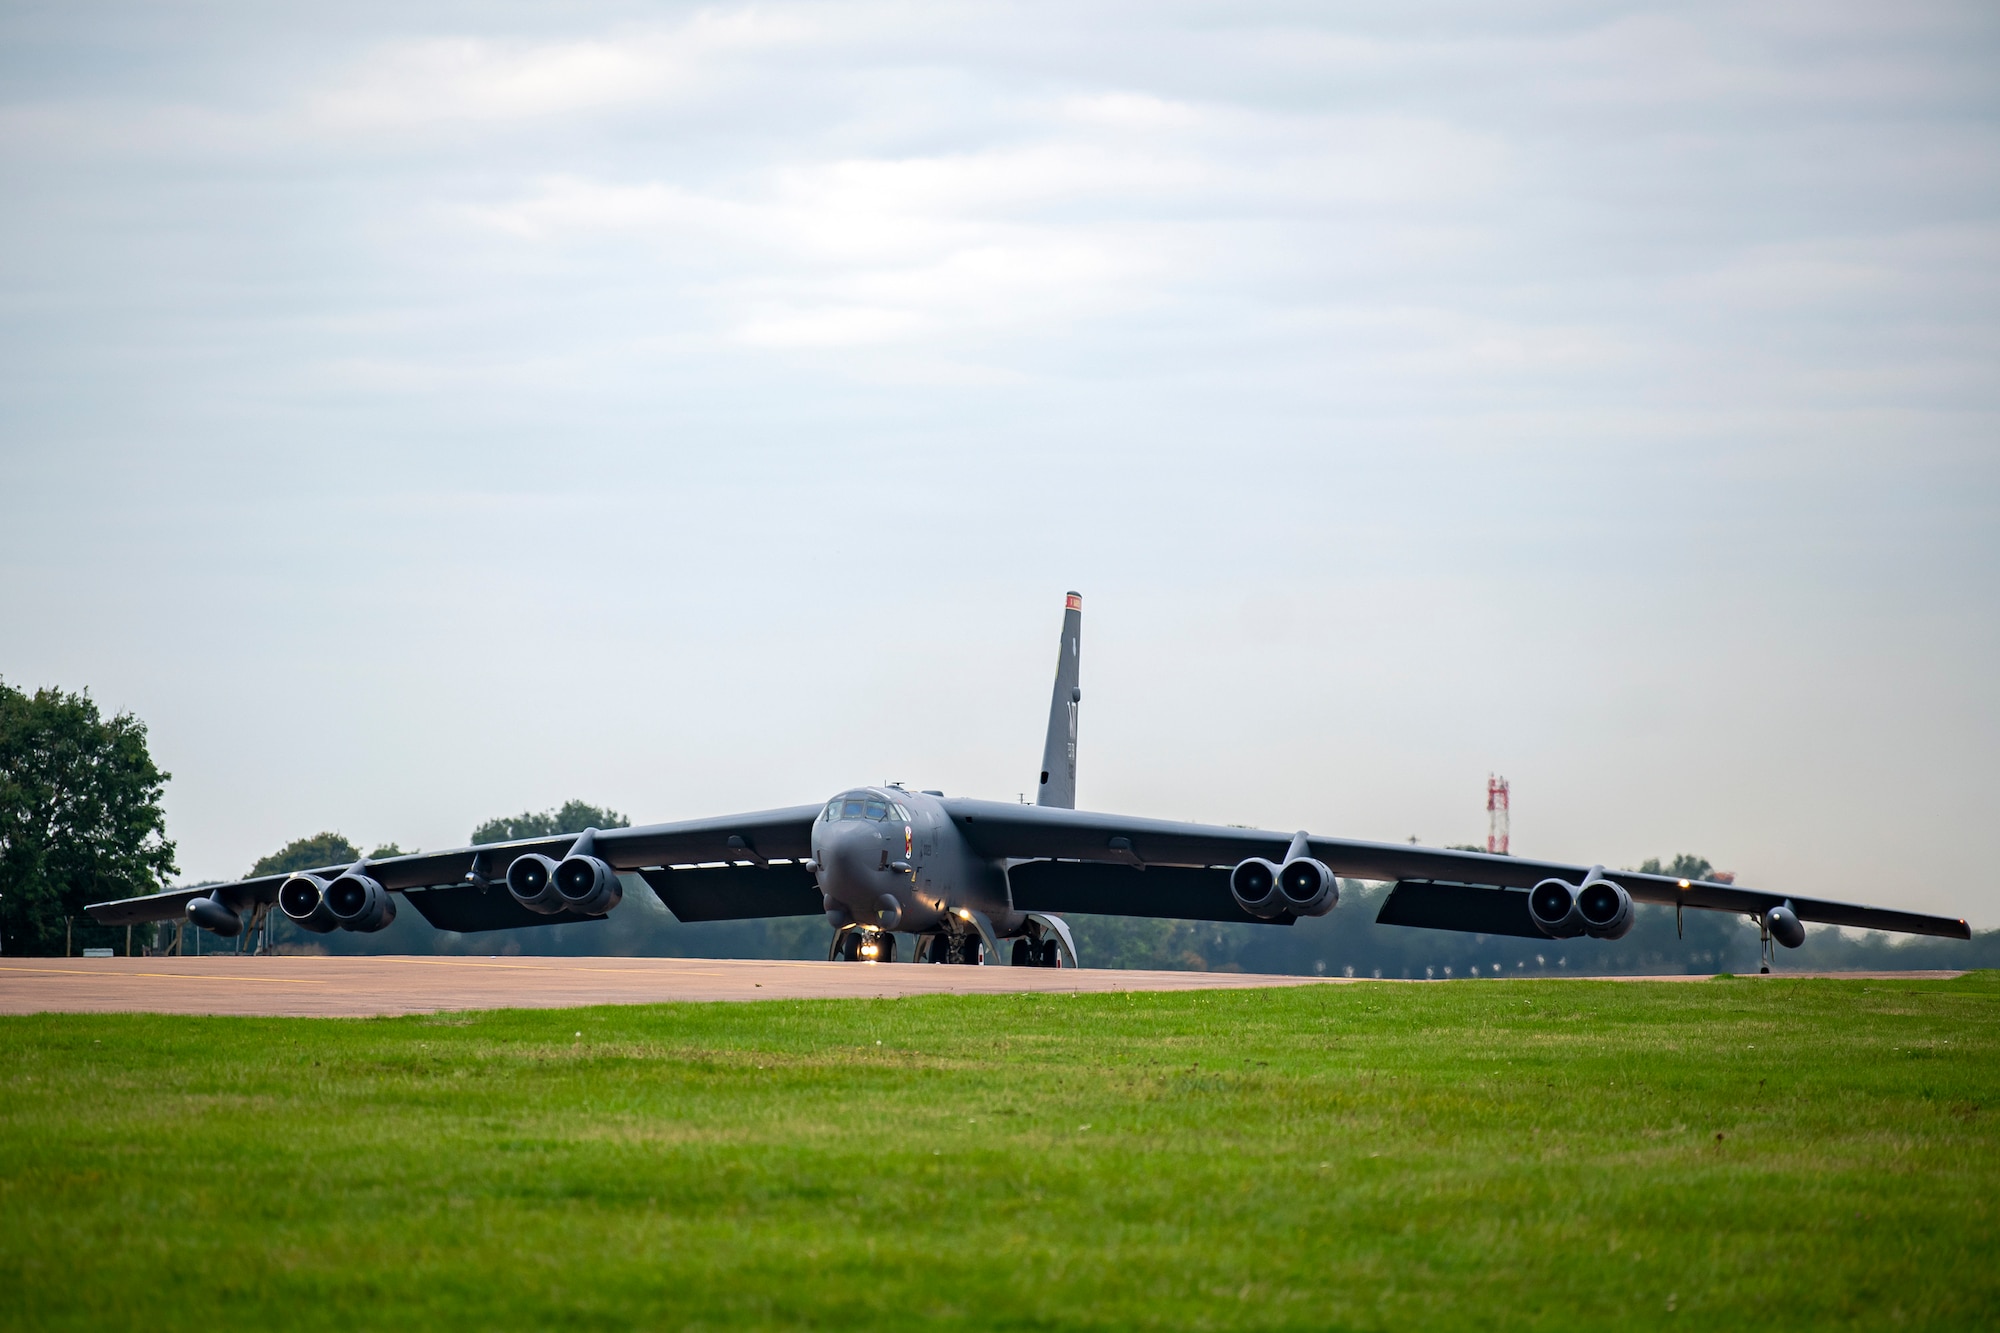 A B-52 Stratofortress aircraft assigned to the 23rd Expeditionary Bomb Squadron, taxis on the runway prior to takeoff at RAF Fairford, United Kingdom, Sept. 21, 2022. Strategic bombers contribute to stability in the European theater, they provide a critical role in strategic deterrence. If called upon, U.S. bombers offer a rapid response capability. (U.S. Air Force photo by Staff Sgt. Eugene Oliver)